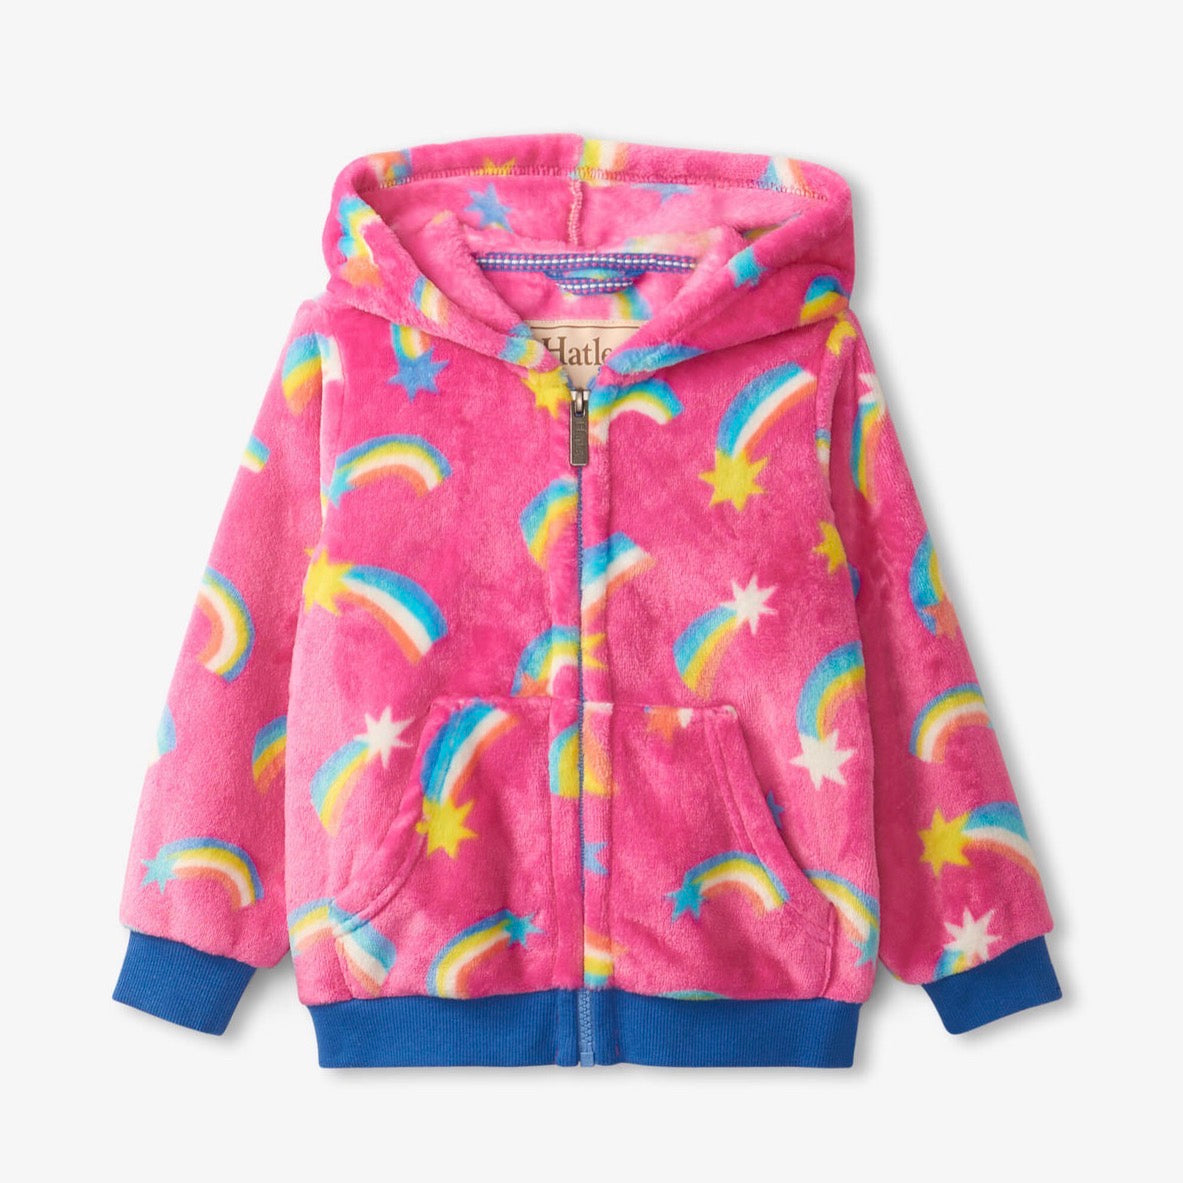 Hatley Shooting Stars Fuzzy Jacket F23ssk1551 Clothing 4YRS / Pink,5YRS / Pink,6YRS / Pink,7YRS / Pink,8YRS / Pink,10YRS / Pink,12YRS / Pink